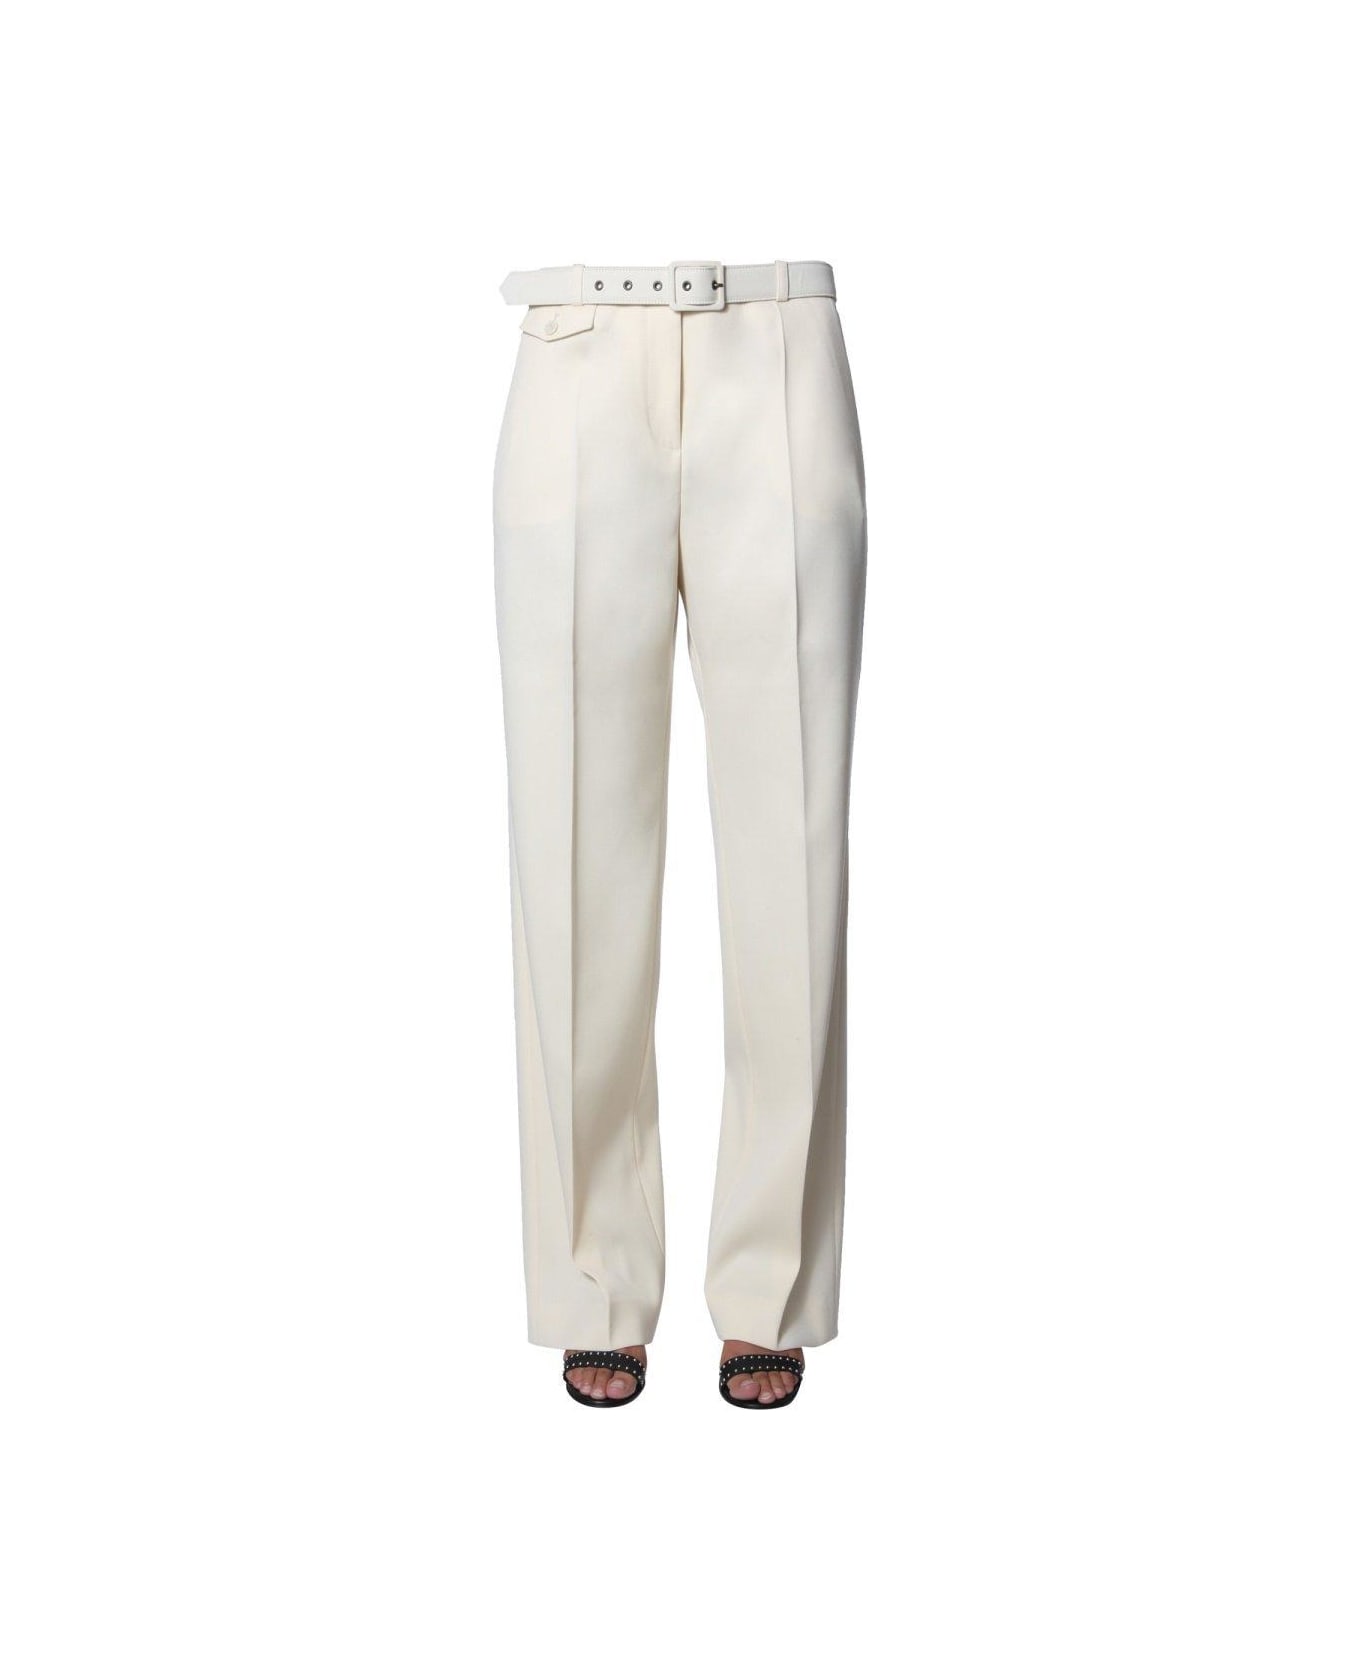 Givenchy Belted Tailored Pants - WHITE